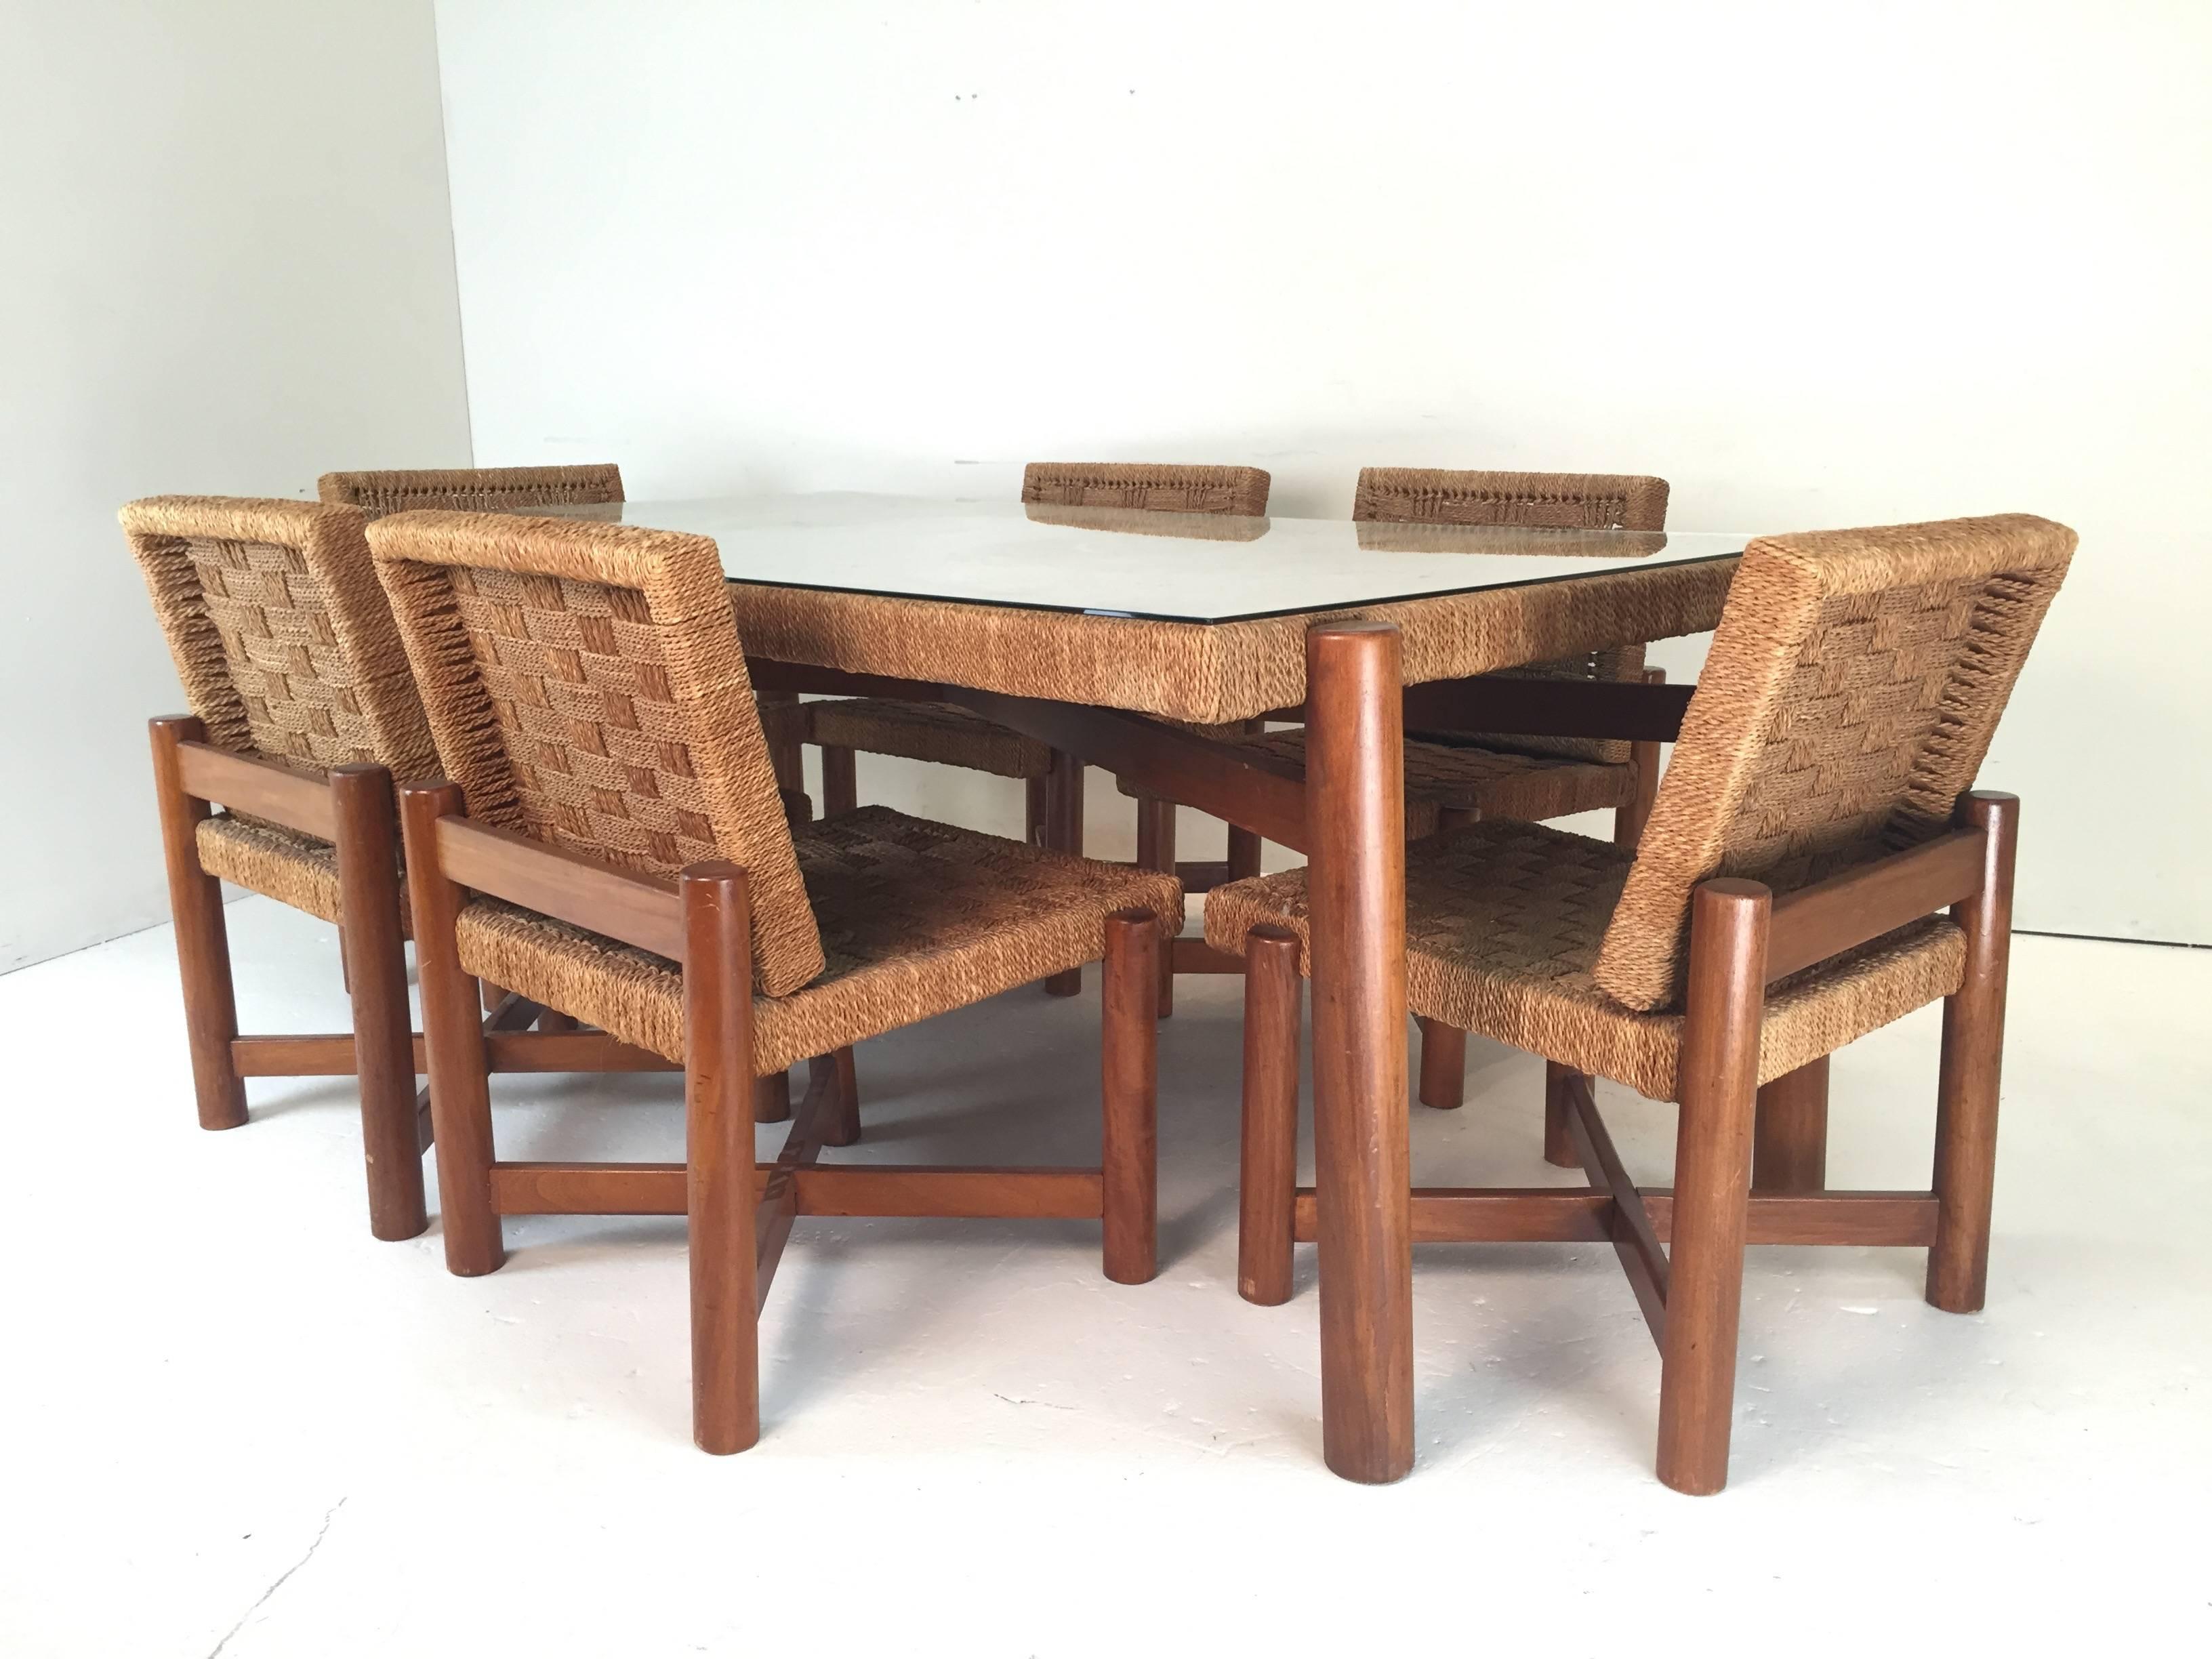 In good original condition with minor wear consistent with age and use. The frames of the table and chairs are built of ash wood with a woven sisal rope covering. These would perfectly match in as interior with the designs from Charlotte Perriand,